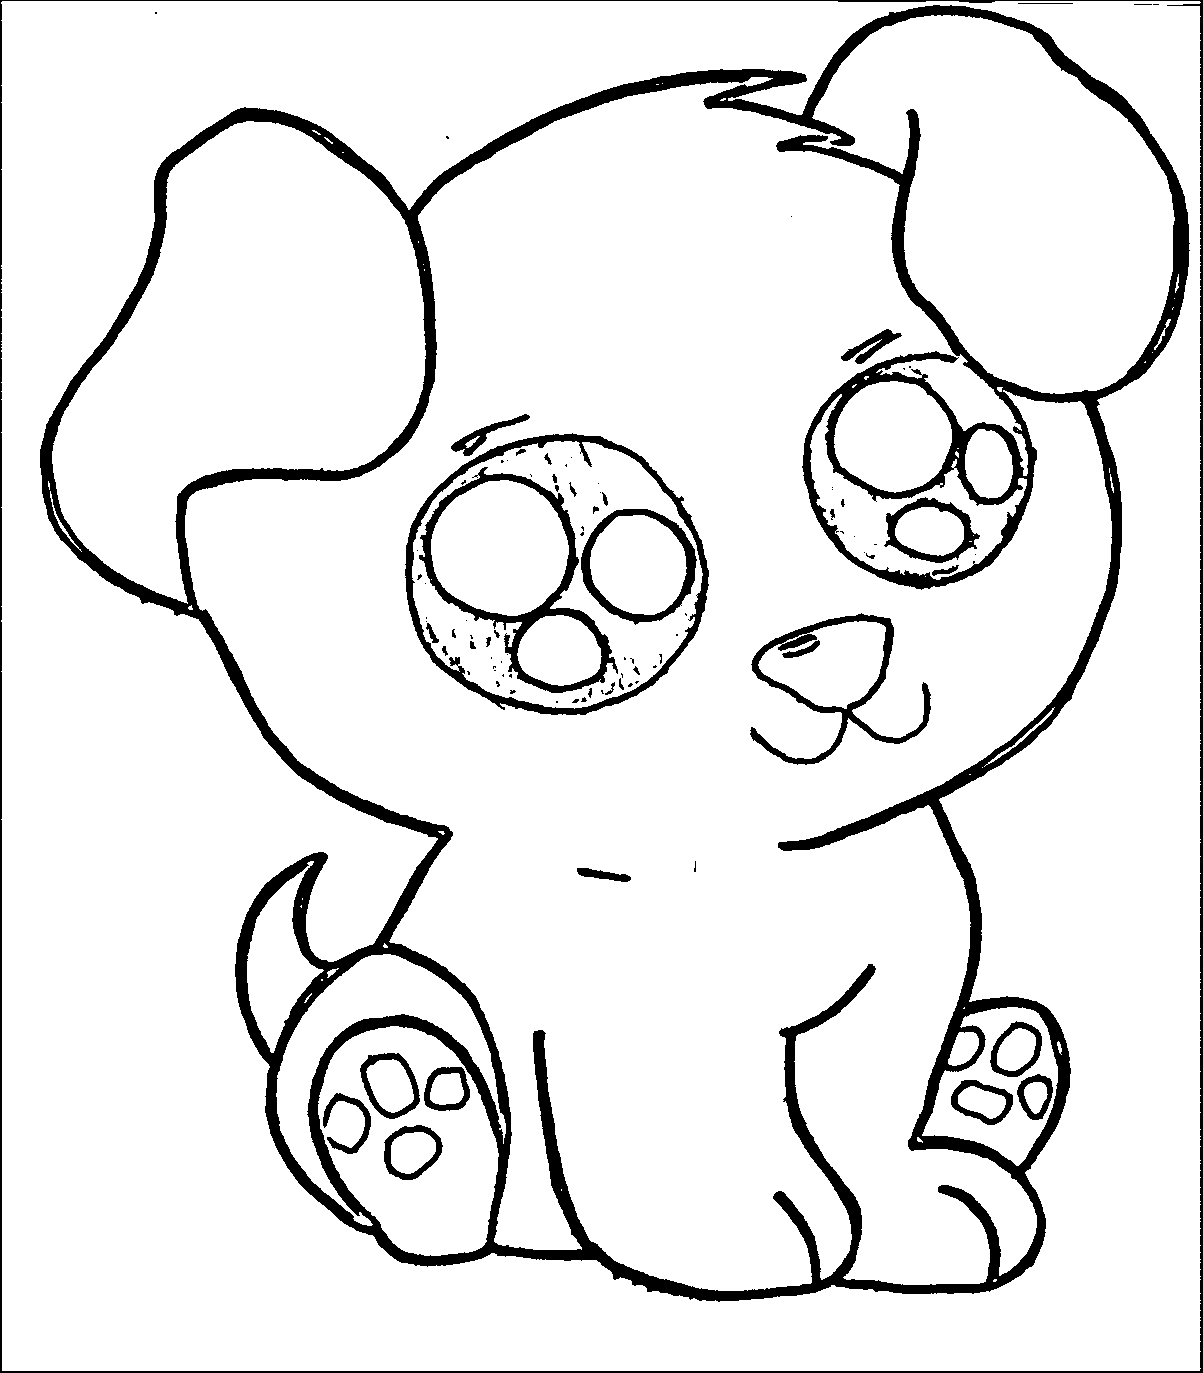 puppy colouring pages coloring pictures of puppys to print and color look at colouring puppy pages 